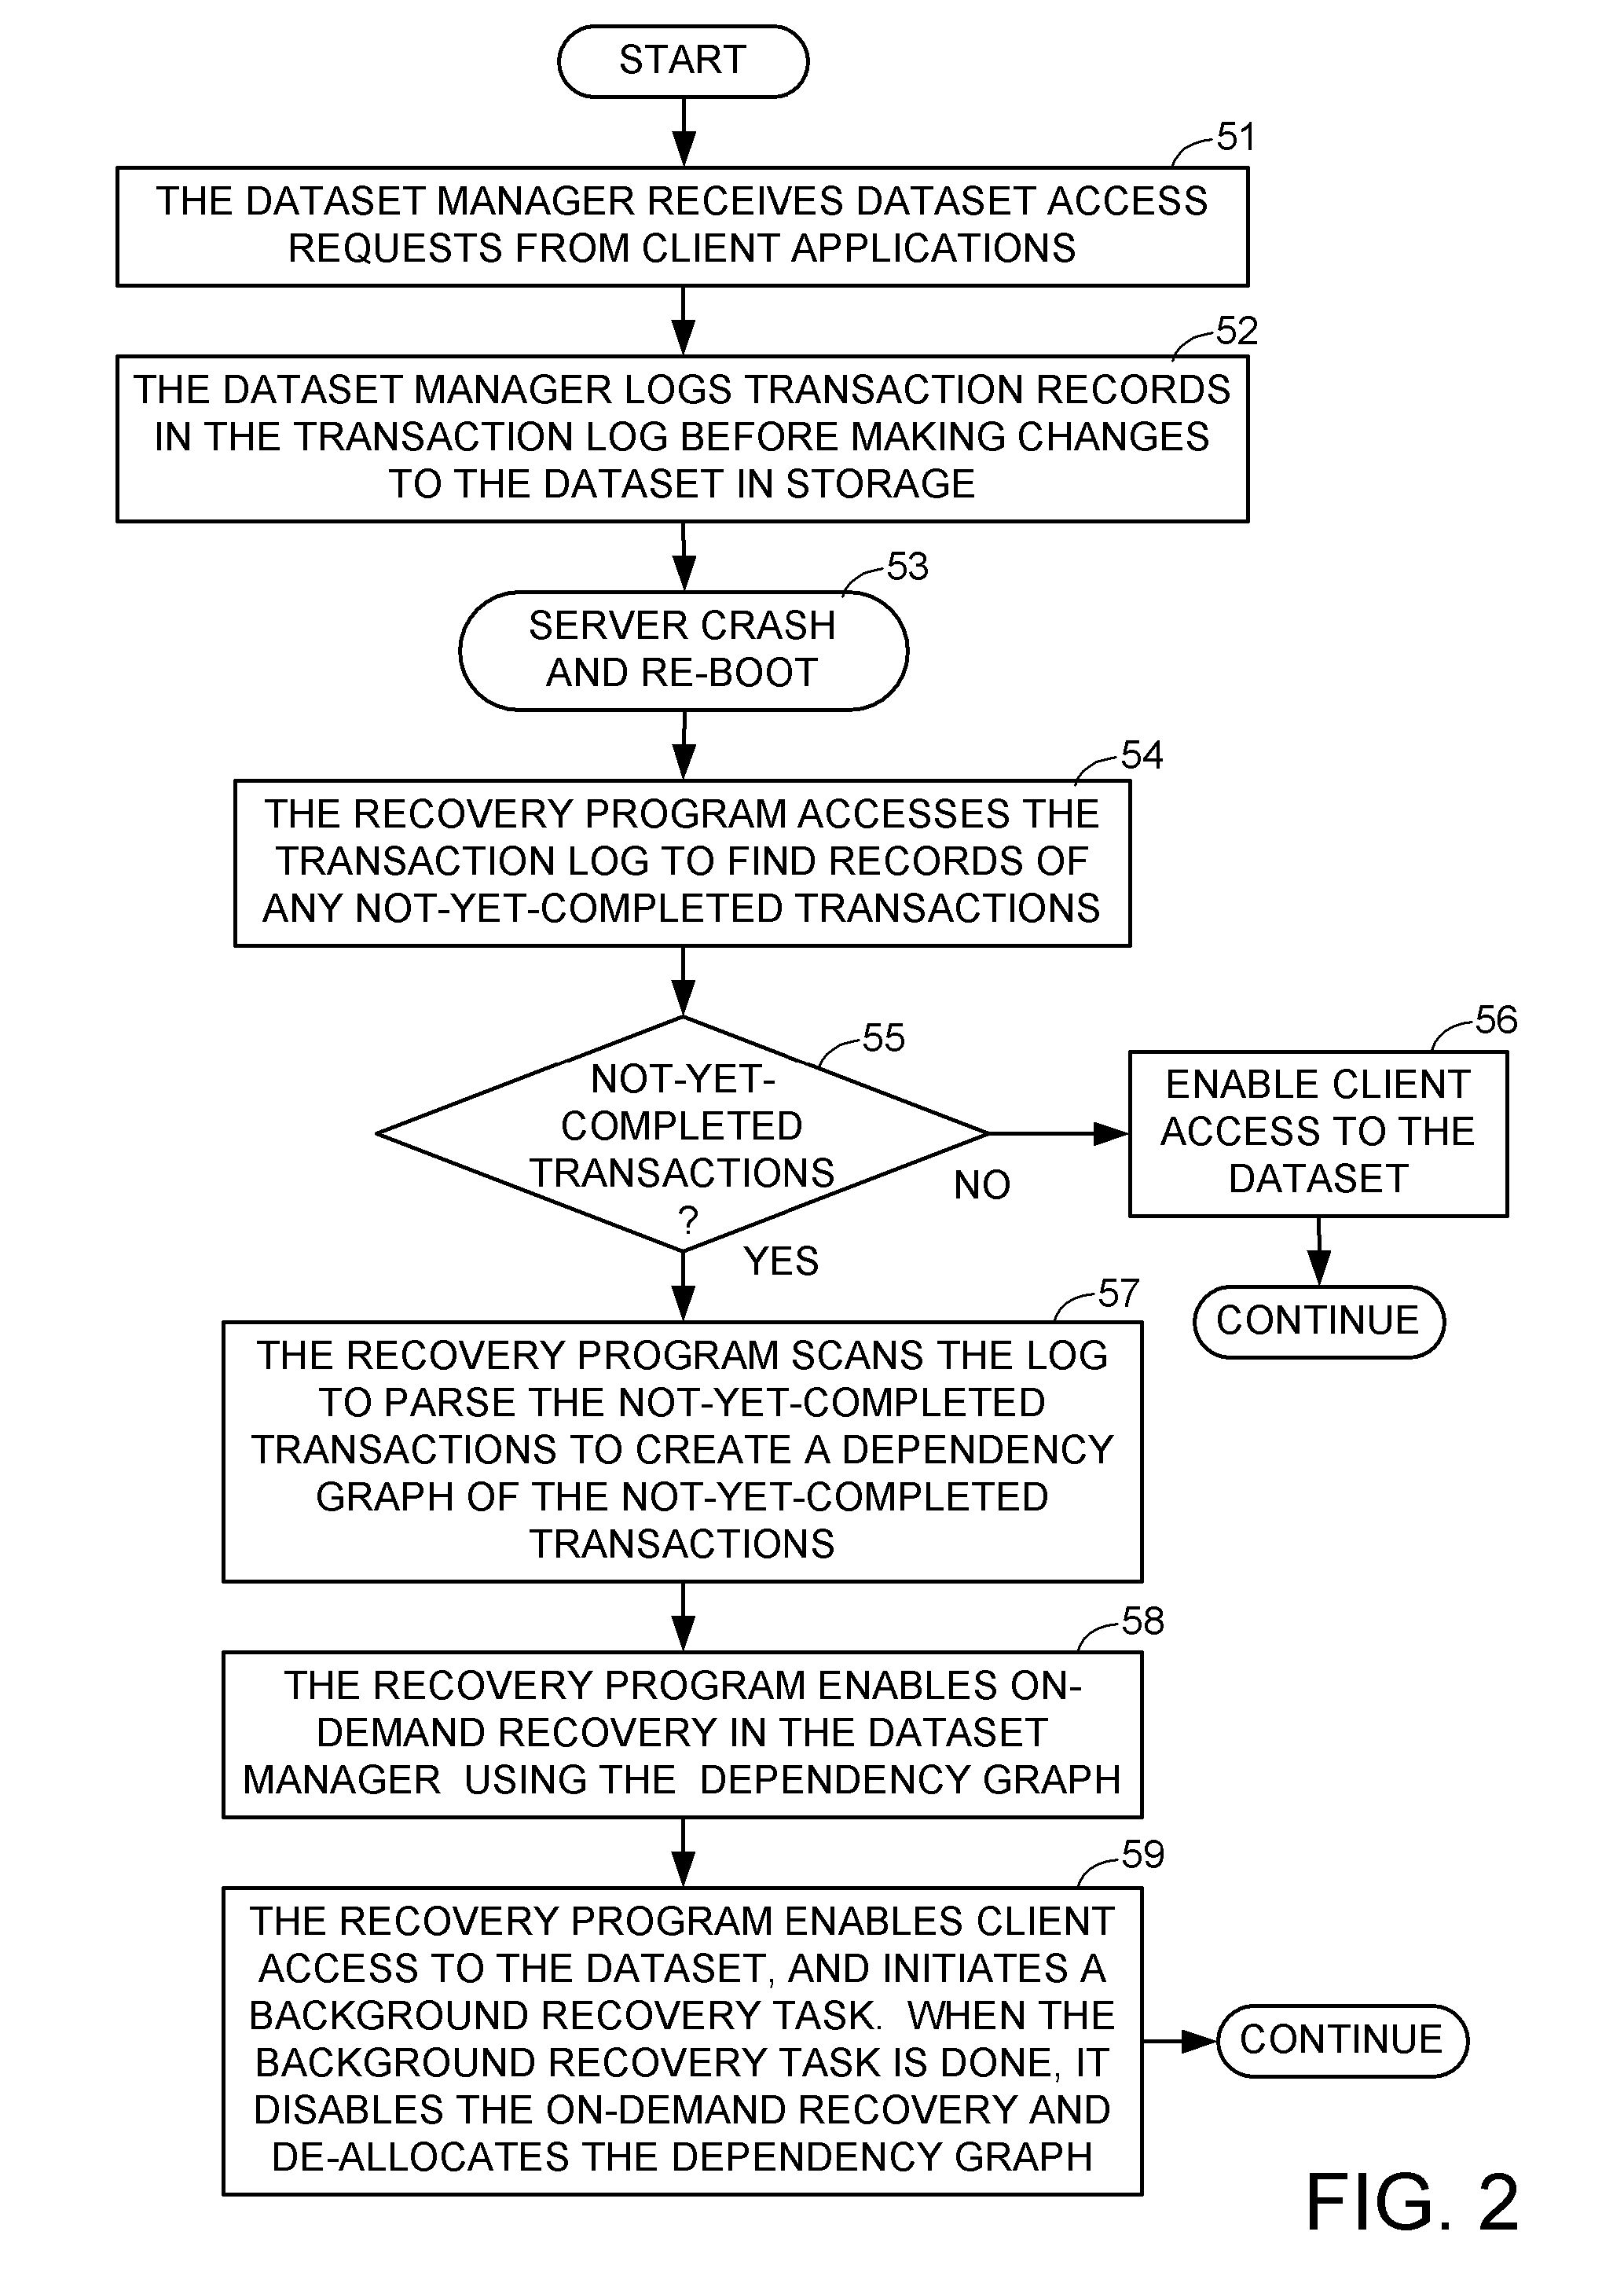 Concurrent access to data during replay of a transaction log